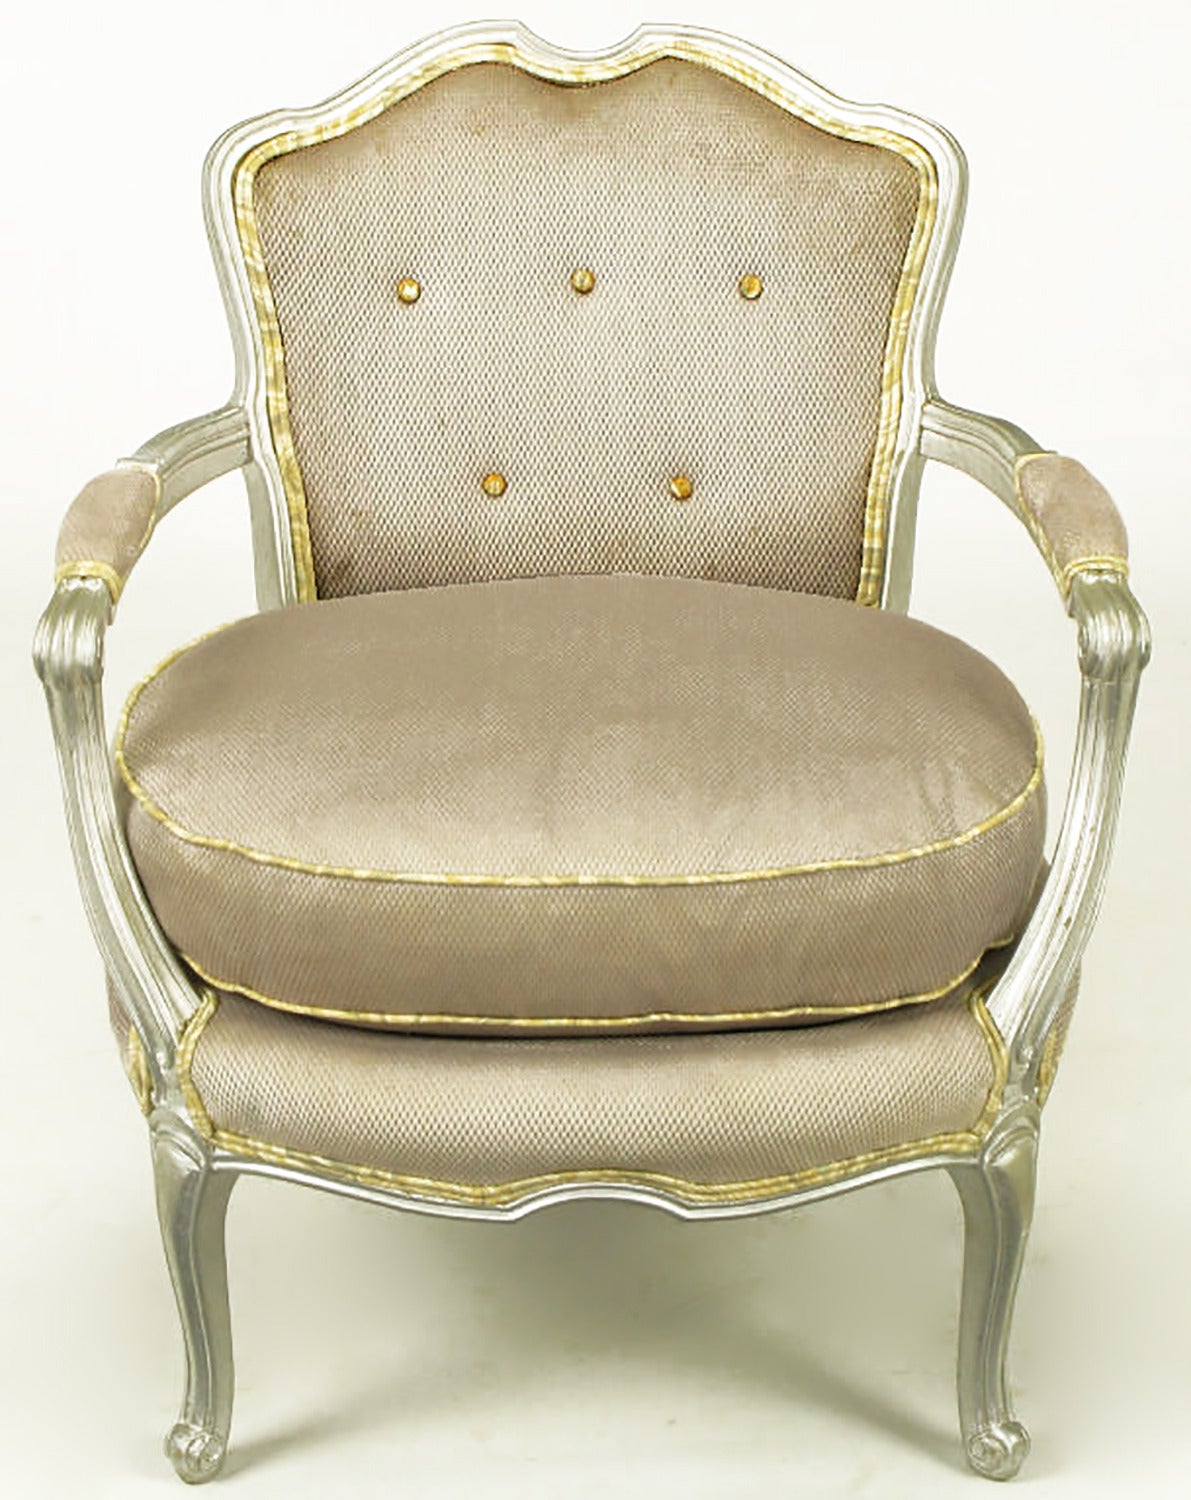 Pair of Louis XV fauteuils with plush seat cushions and button tufted backs in grey piqued velvet with contrasting taupe print velvet welting and buttons. Sliver lacquer over carved wood adds a contemporary touch.